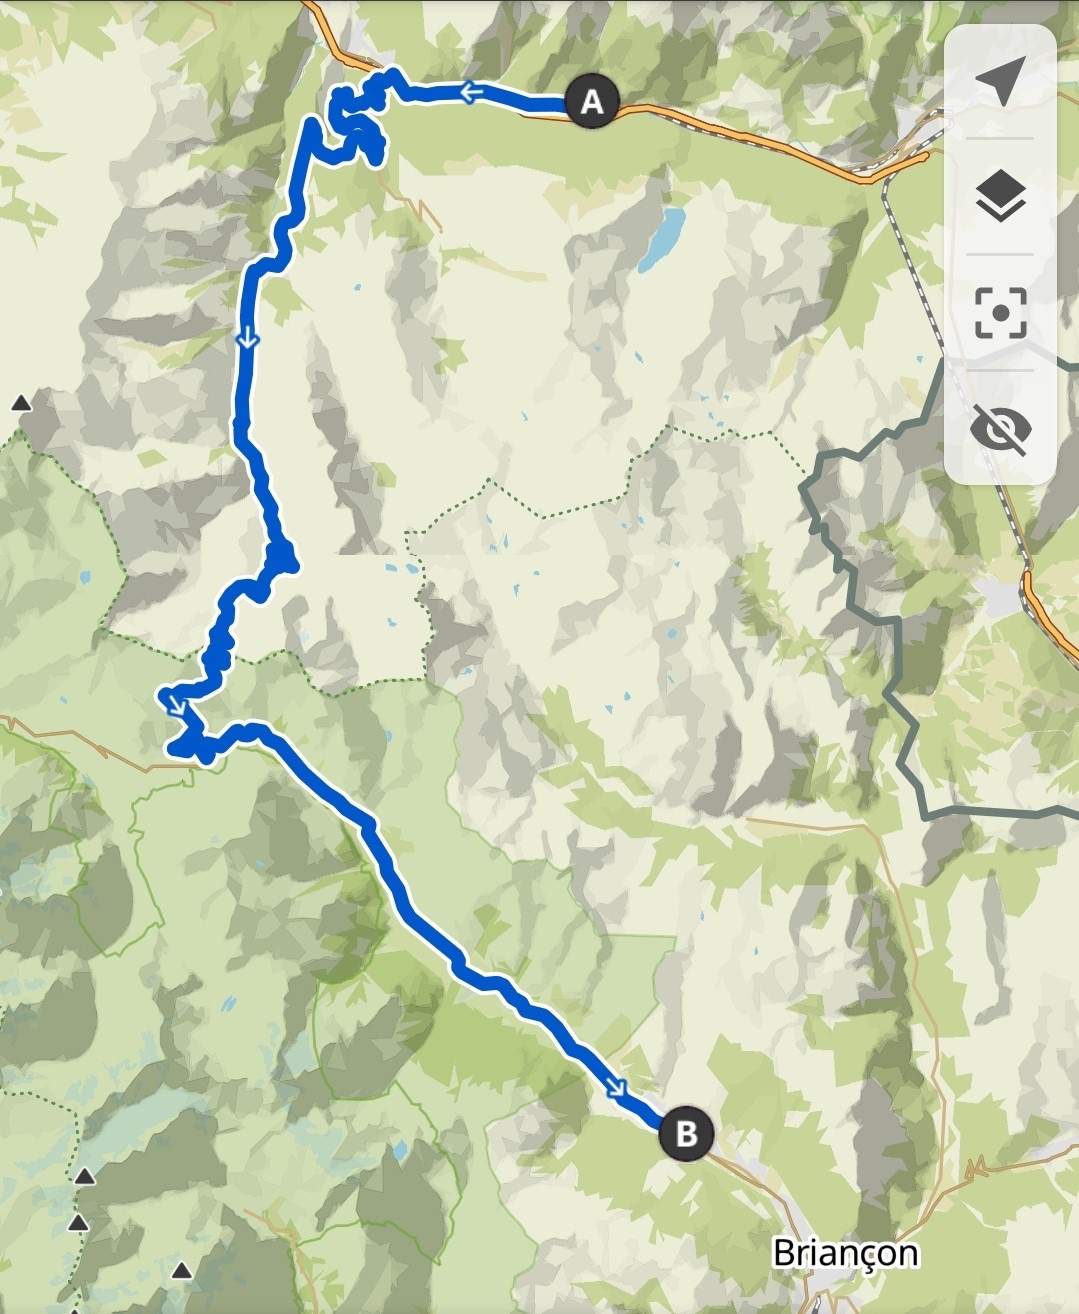 Route Day 7